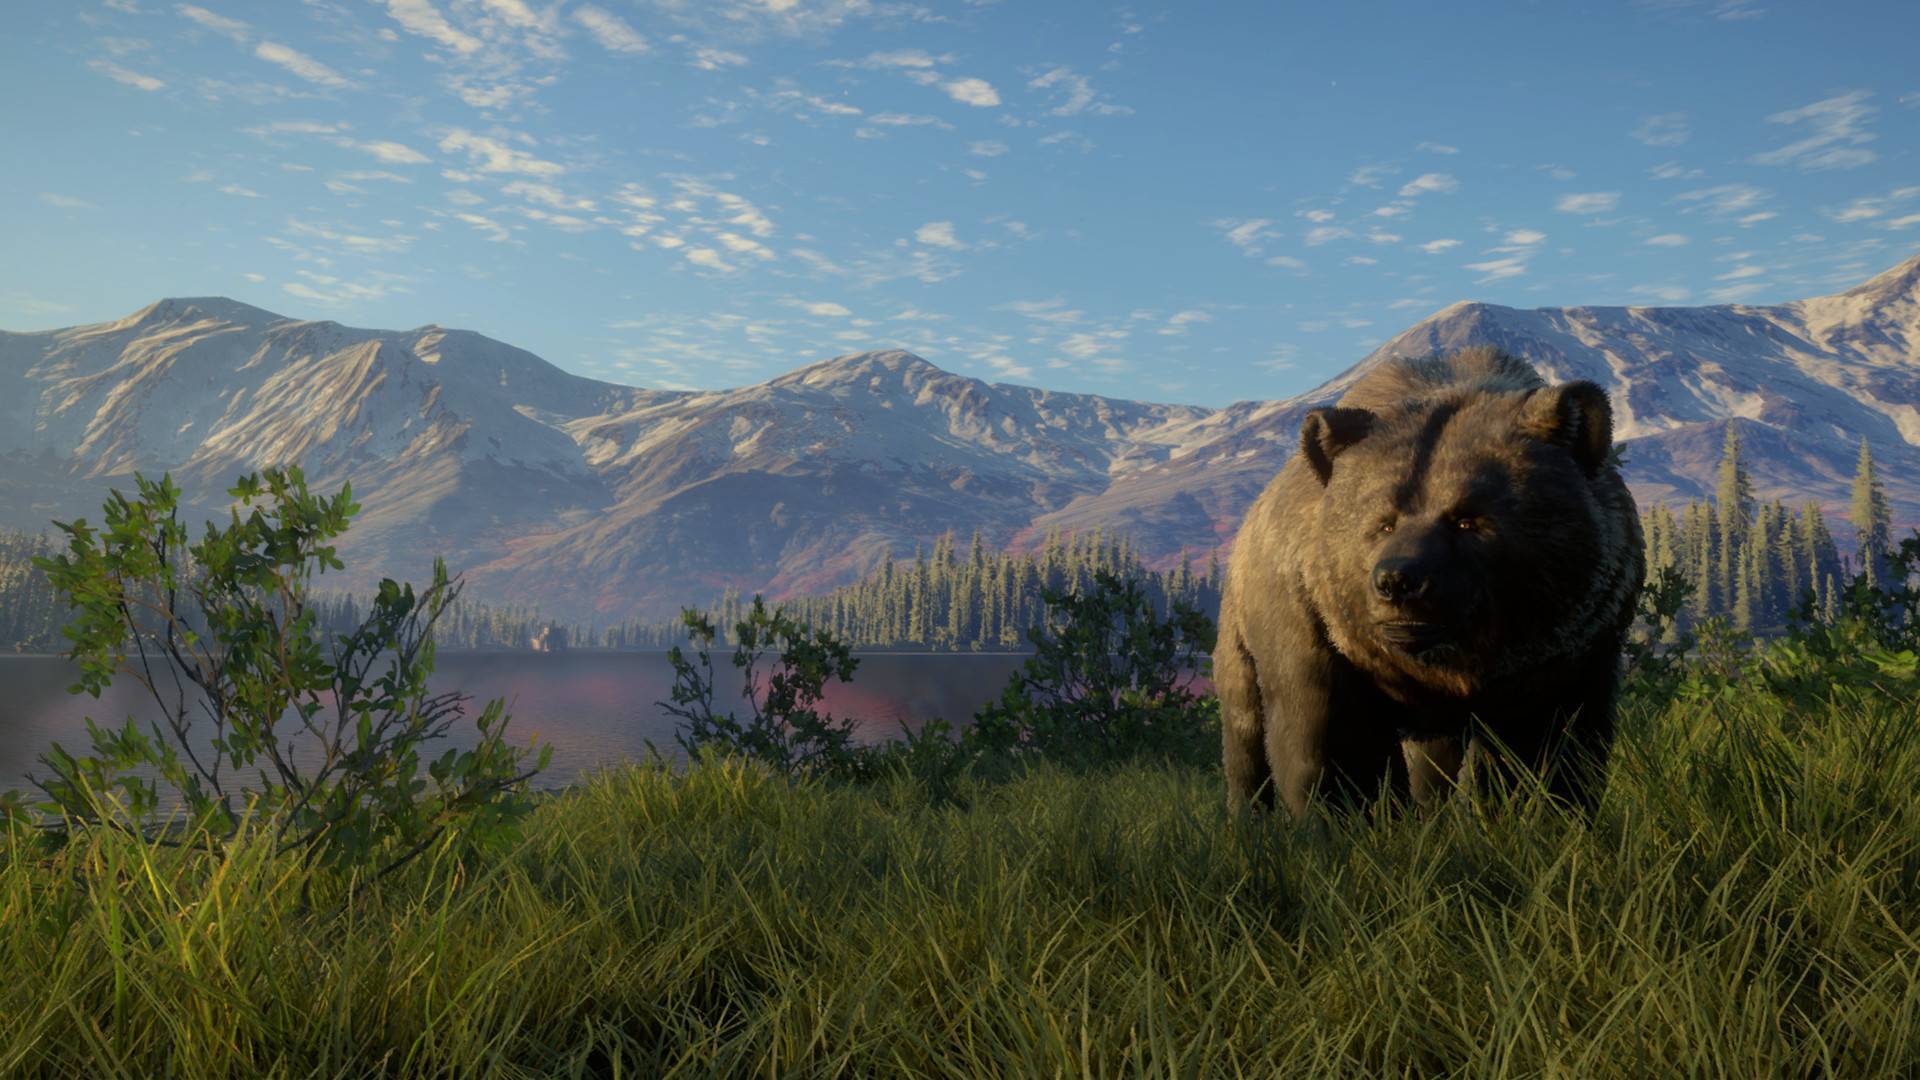 thehunter call of the wild pc review